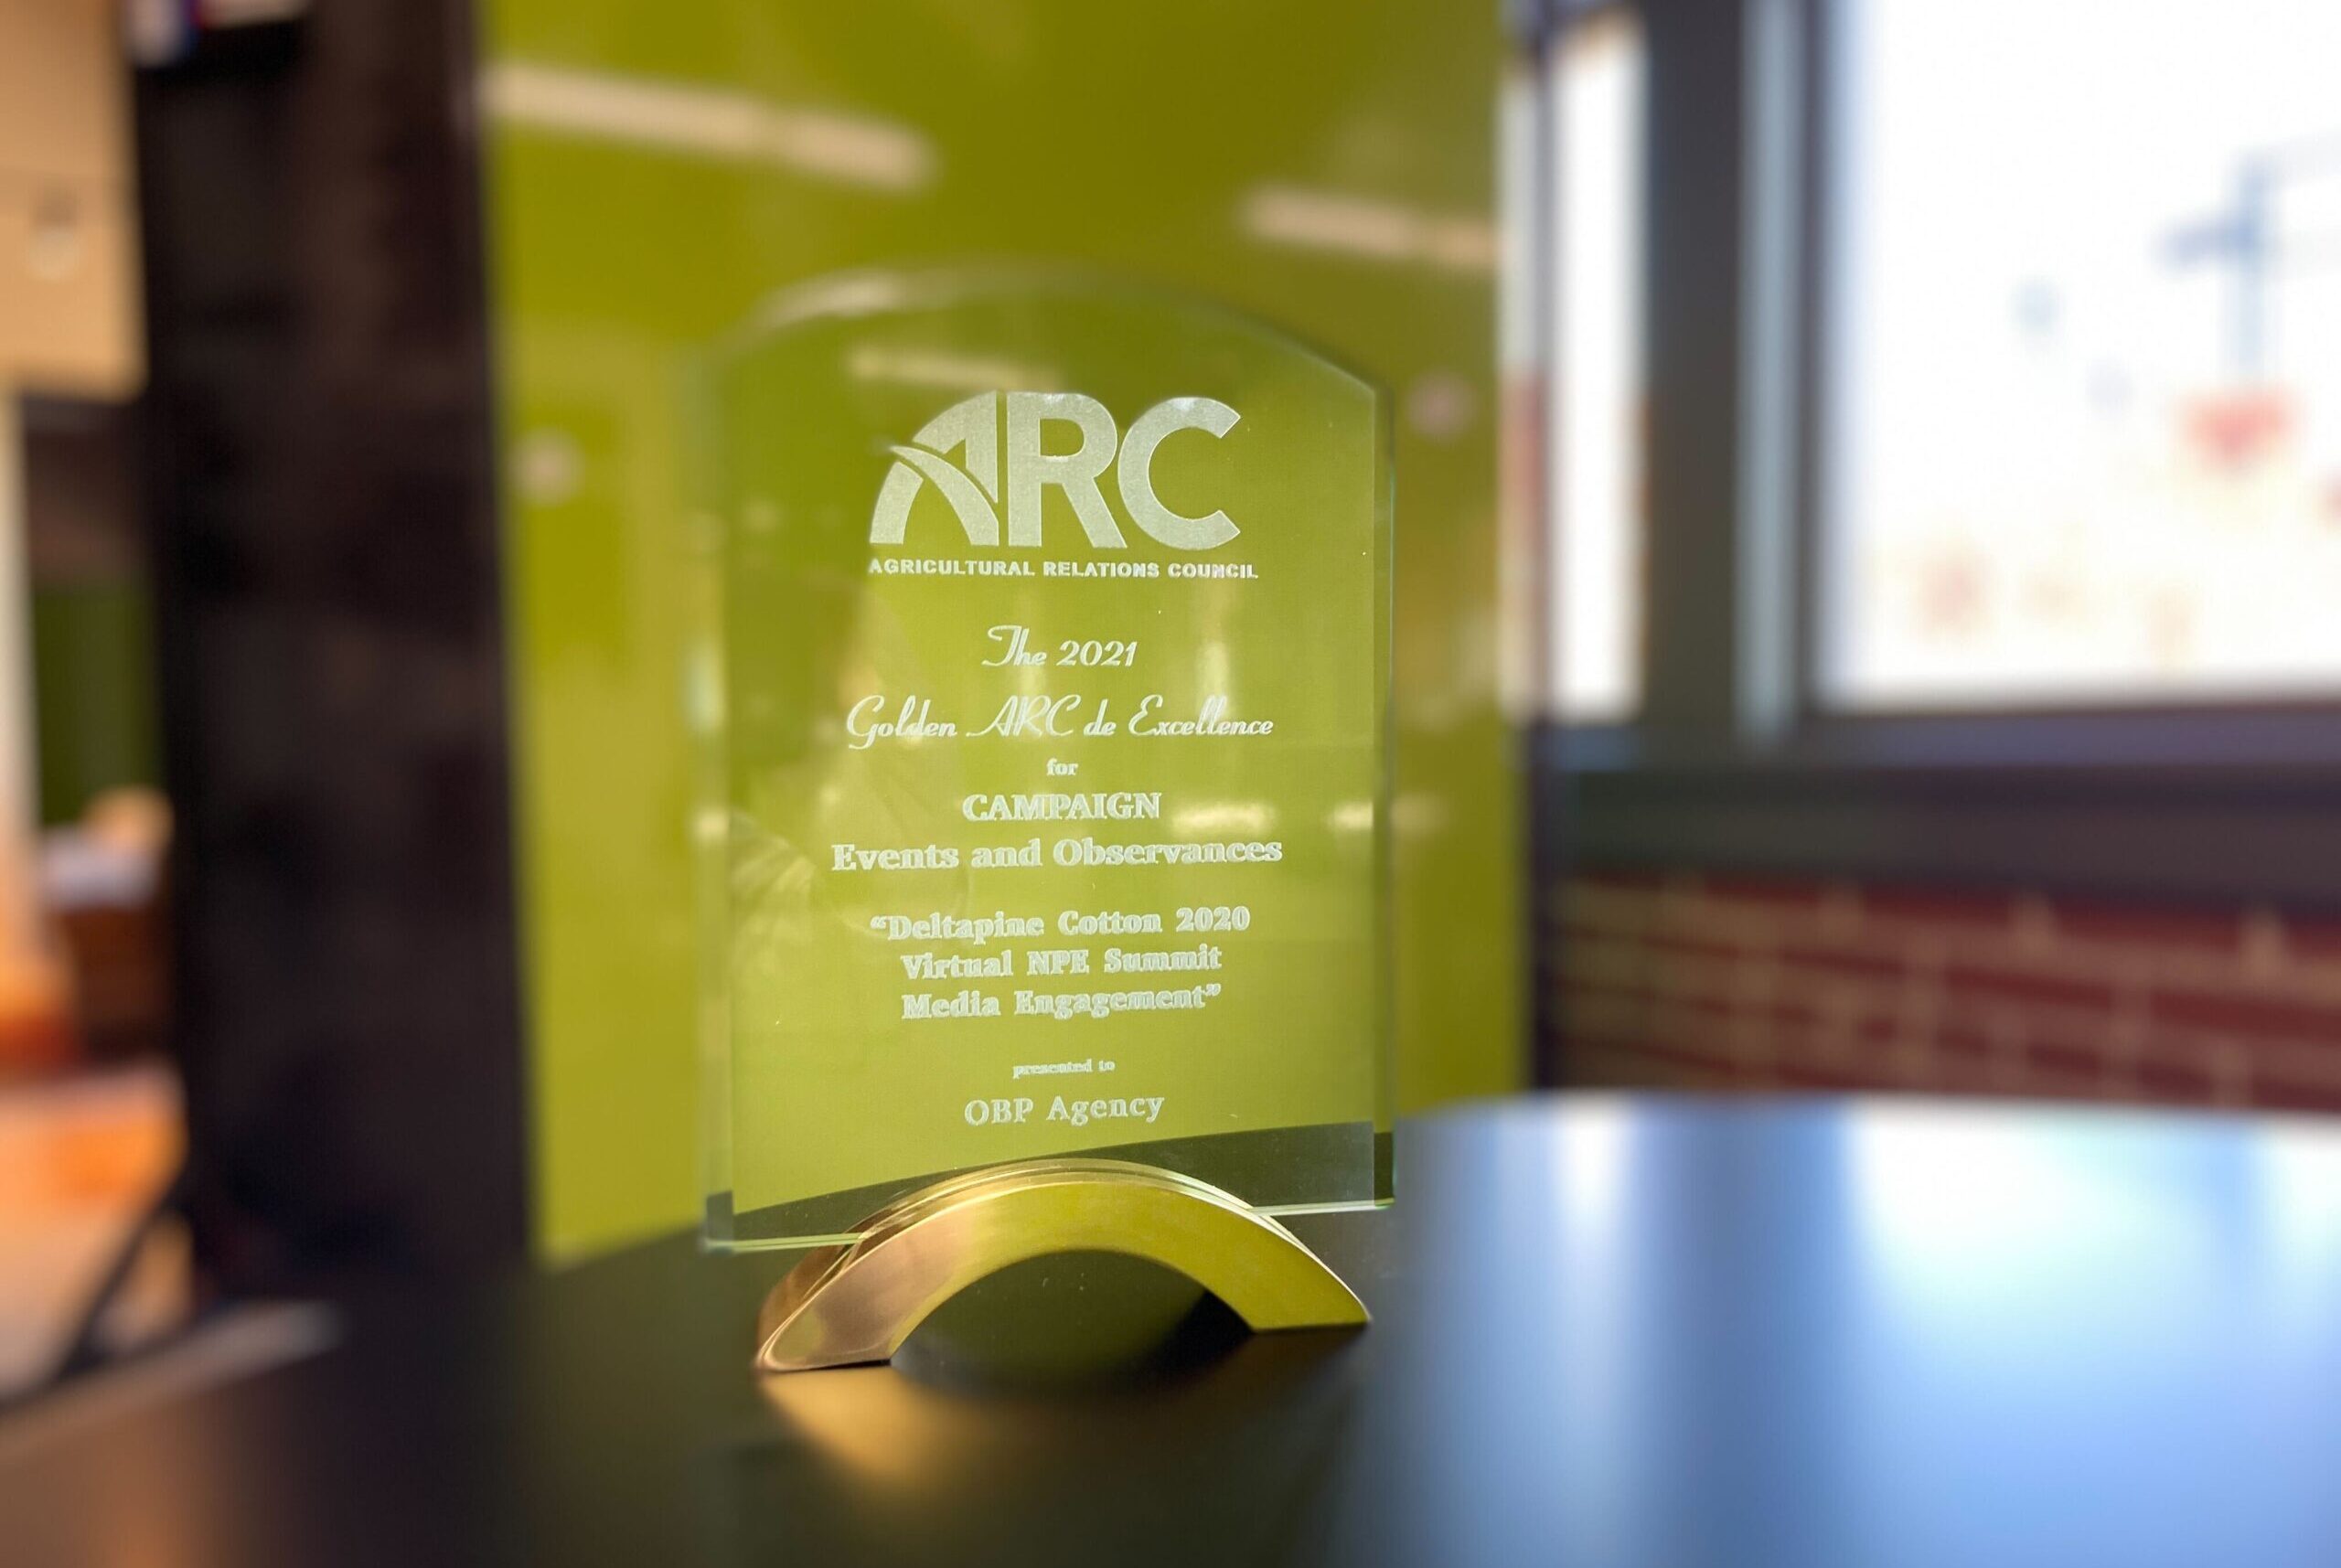 An Agricultural Relations Council ad sits on a table in an office building. The award reads: The 2021 Golden ARC de Excellence for Campaign Events and Observances. "Deltapine Cotton 2020 Virtual NPK Summit Media Engagement" presented to OBP Agency.